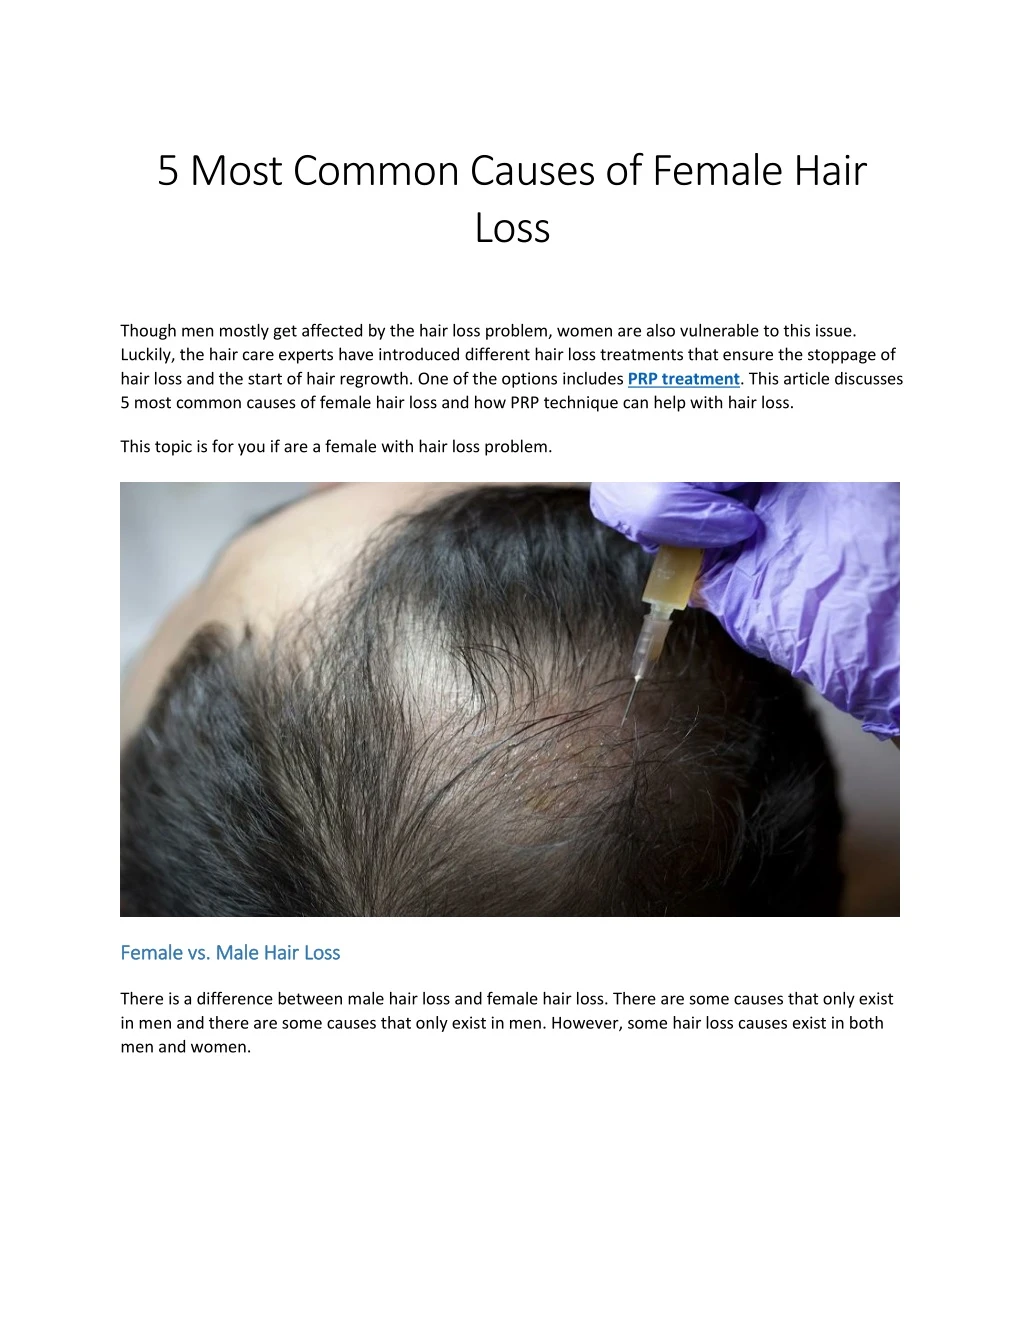 5 most common causes of female hair loss